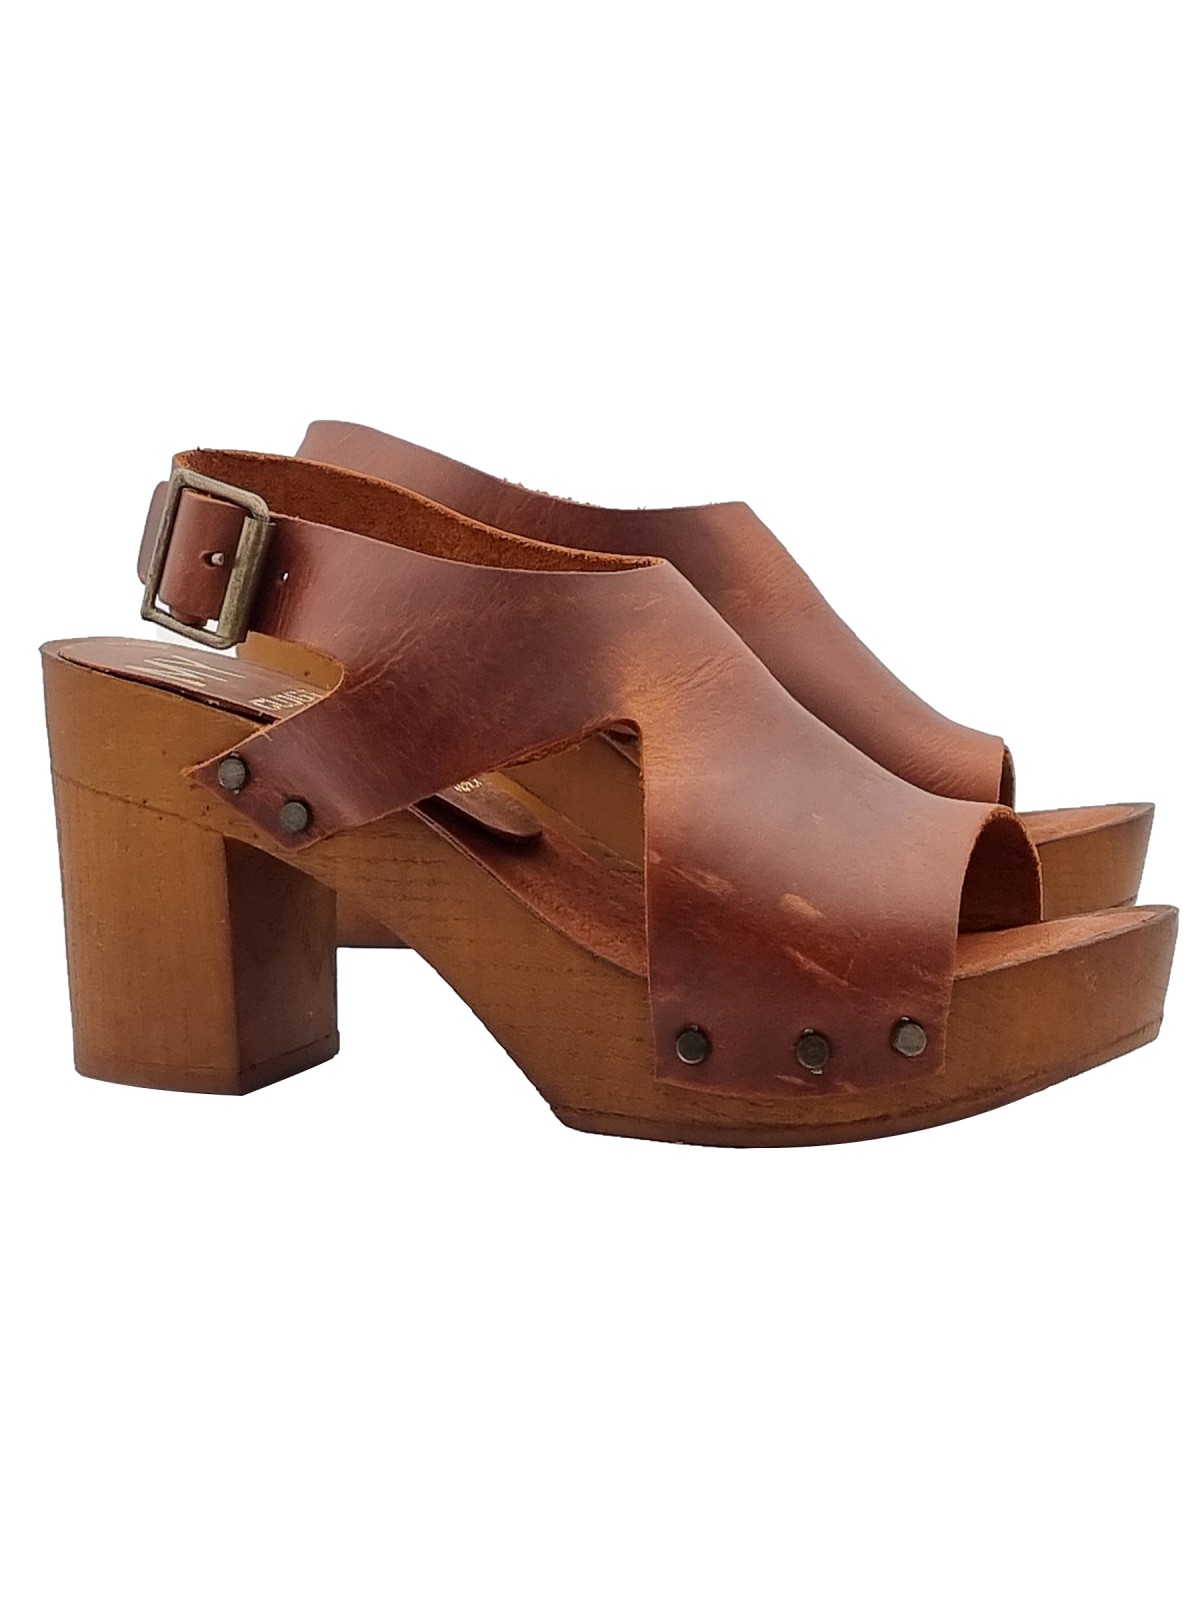 BROWN LEATHER SANDALS WITH WIDE HEEL